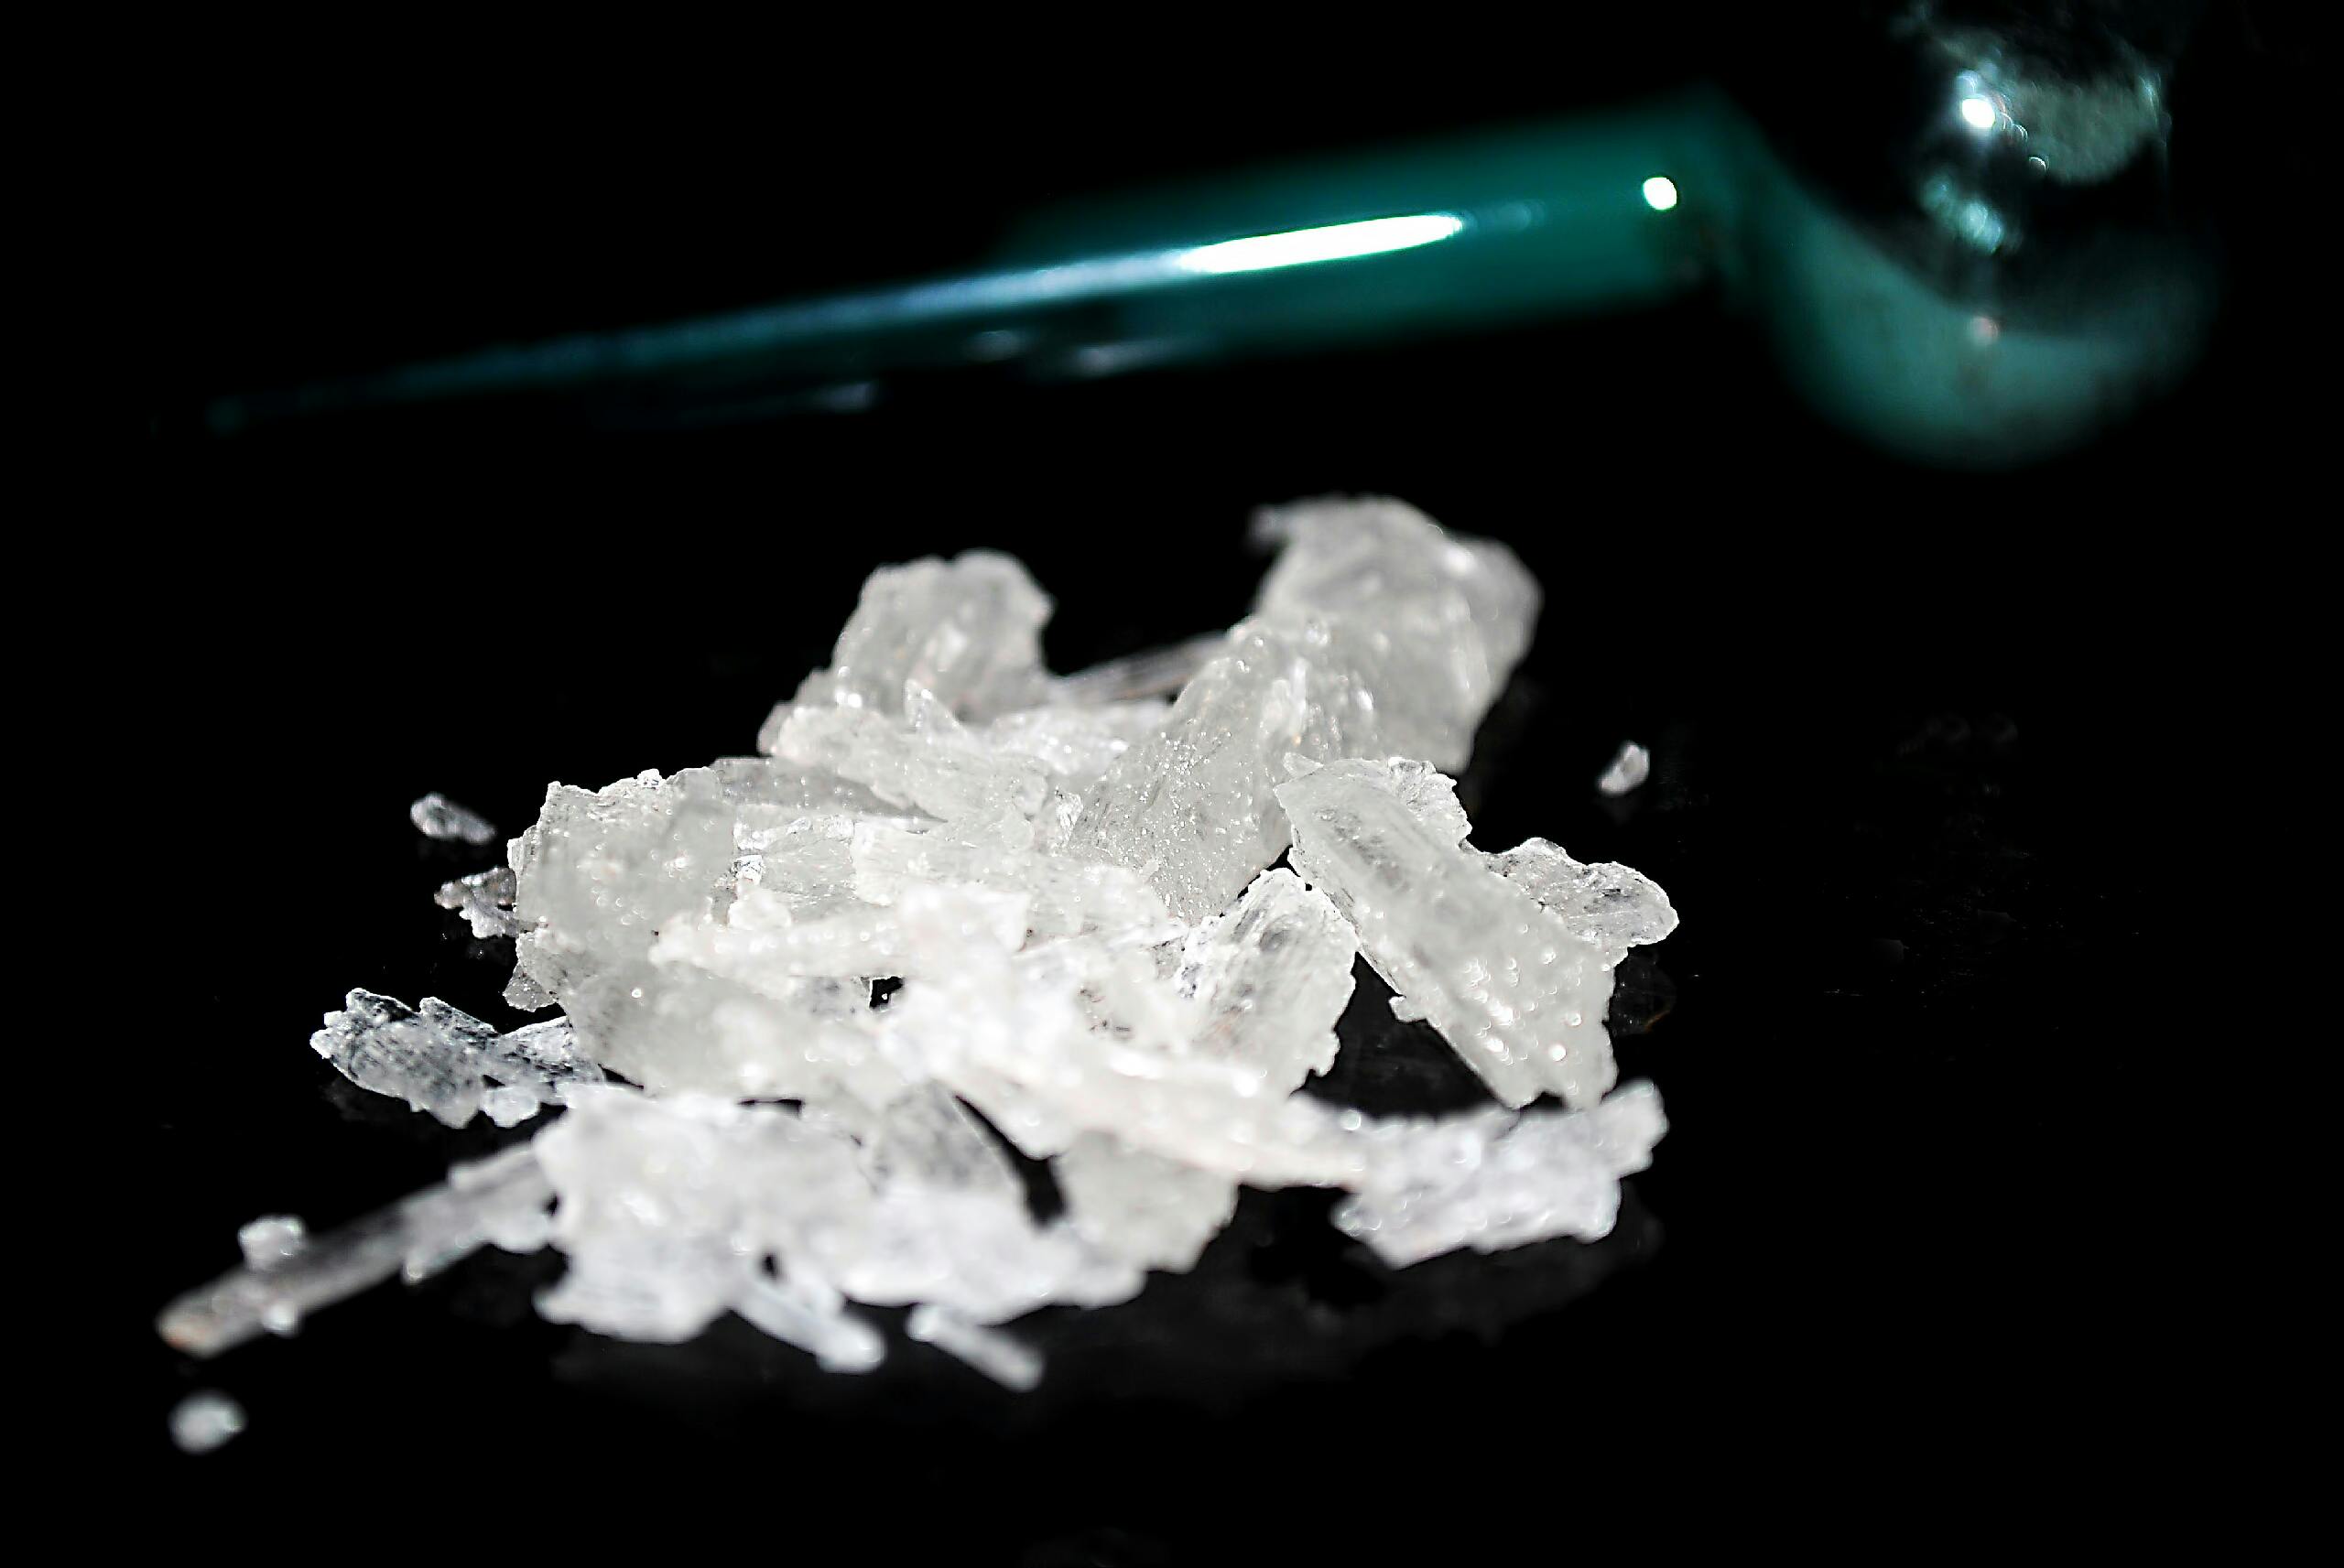 How Much is a Teener of Drugs? Meth, Cocaine